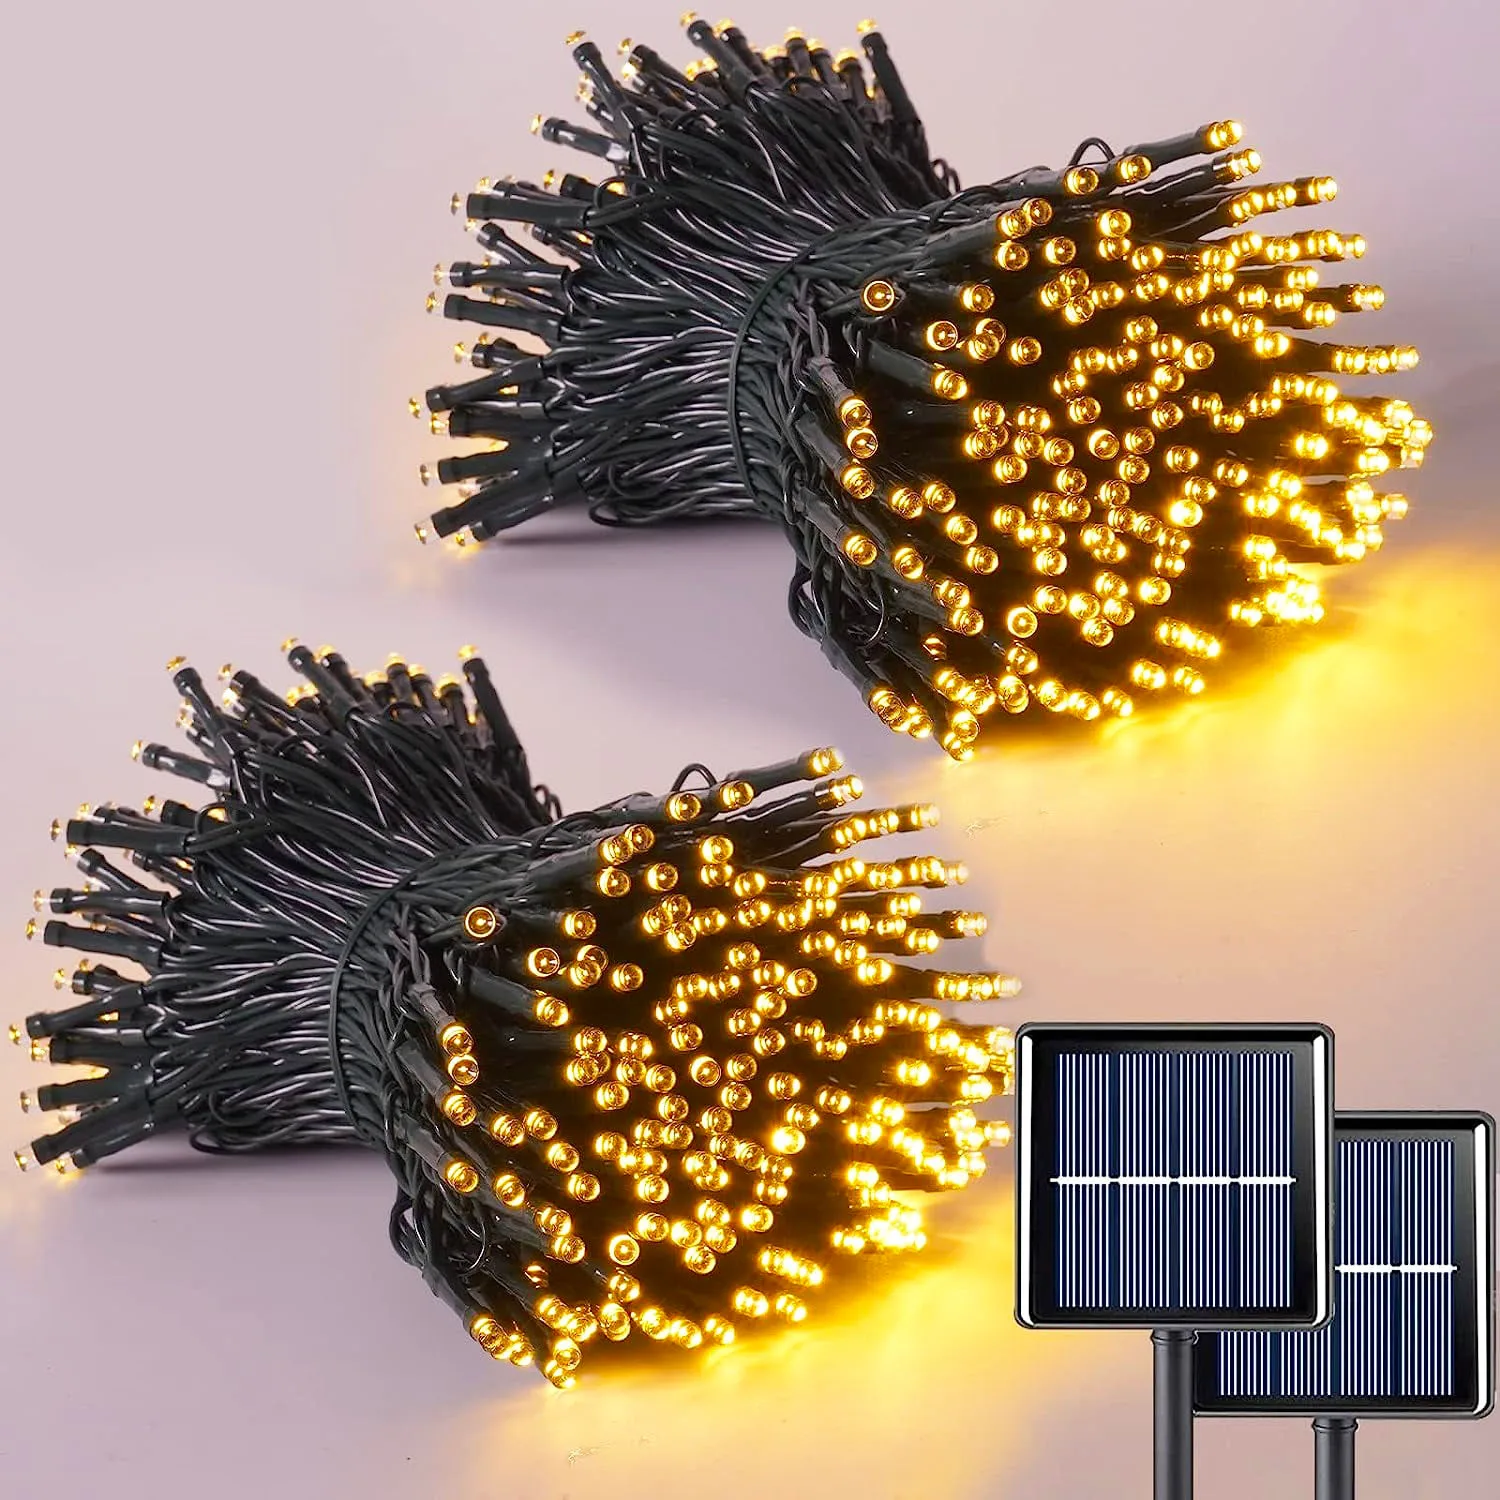 2Pack Solar String Lights Outdoor Waterproof Fairy Christmas Twinkle Lights with 8 Modes Tree Lights for Outdoor Garden Patio solar fence lights 2 modes solar deck lights with auto on off waterproof lamp for outdoor decorate garden step post patio yard